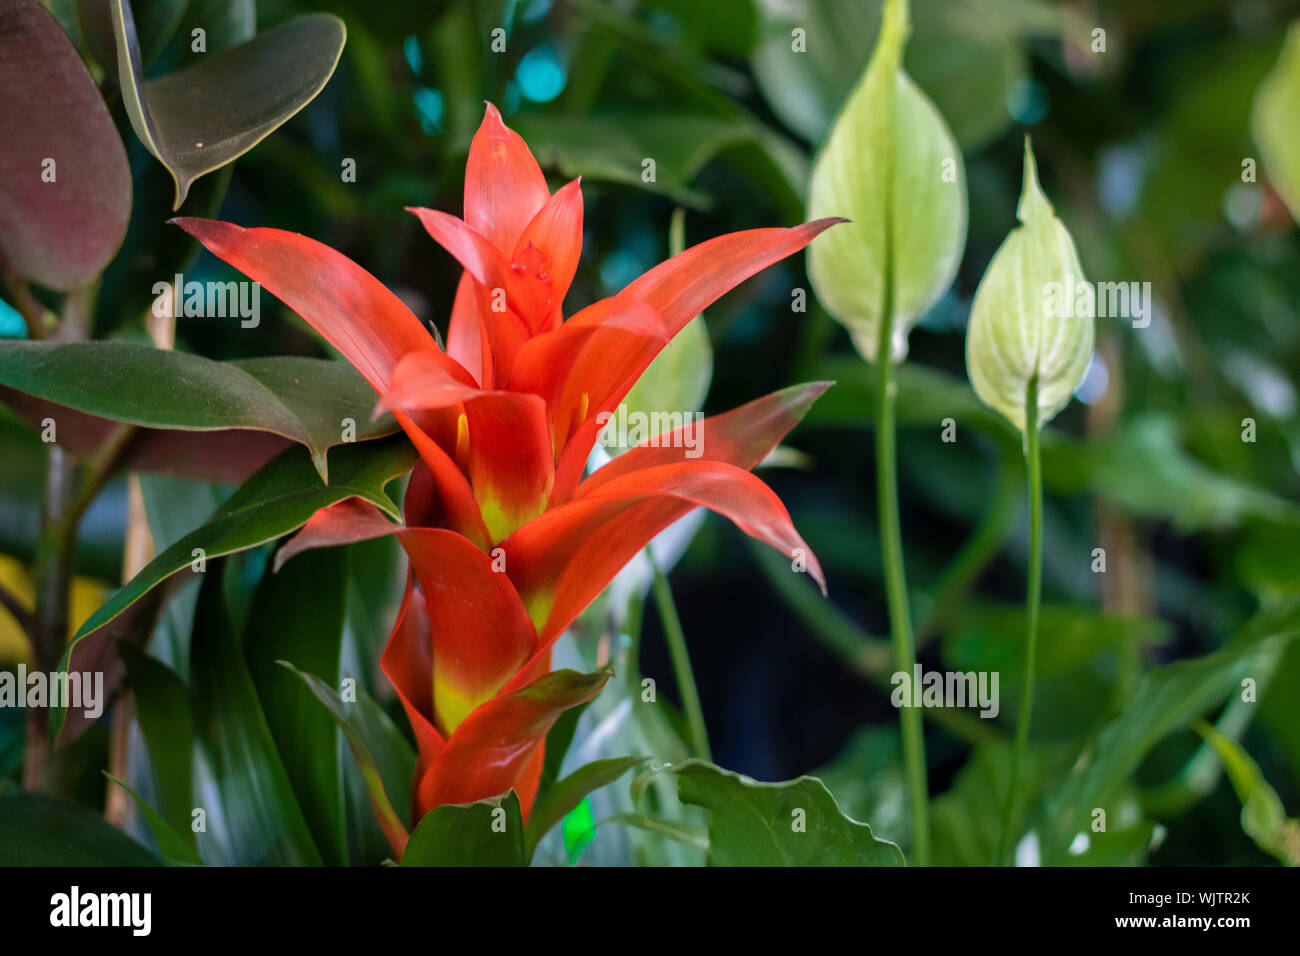 Droophead Tufted Airplant Draw Close Up Of Bromeliad Flower Green Leaves Background Blurred Stock Photo Alamy